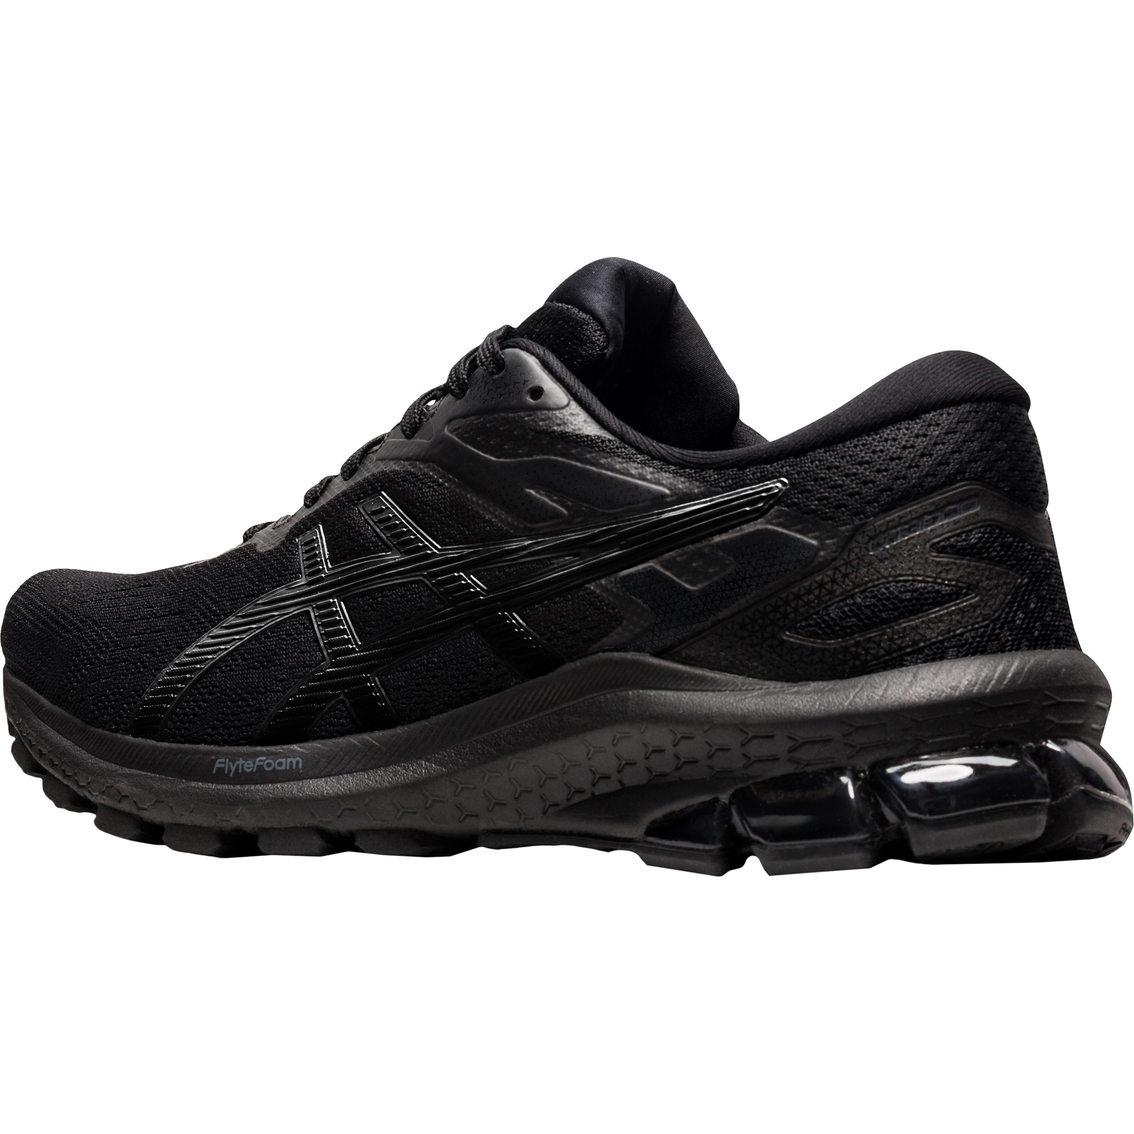 ASICS Women's GT 1000 10 Running Shoes - Image 7 of 7